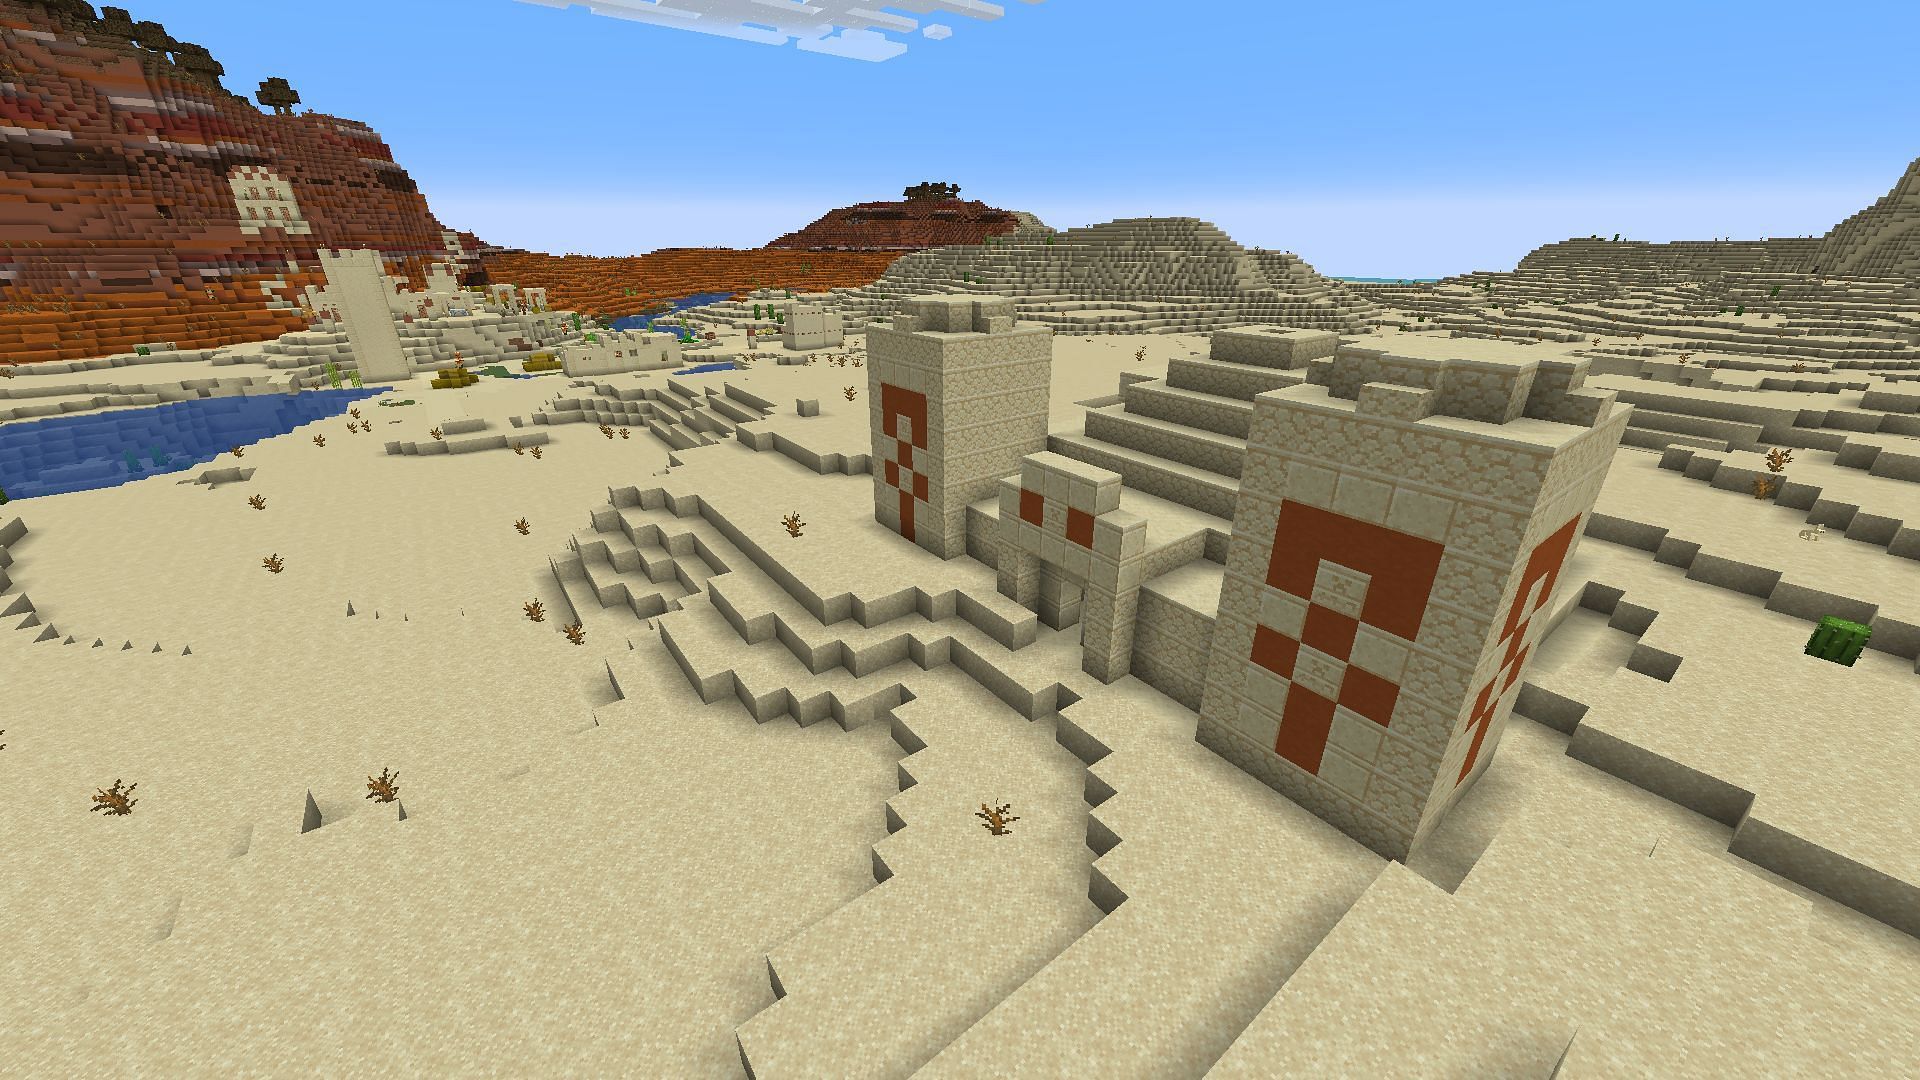 Desert temples/pyramids are filled with treasures for inquisitive Minecraft players (Image via Mojang)